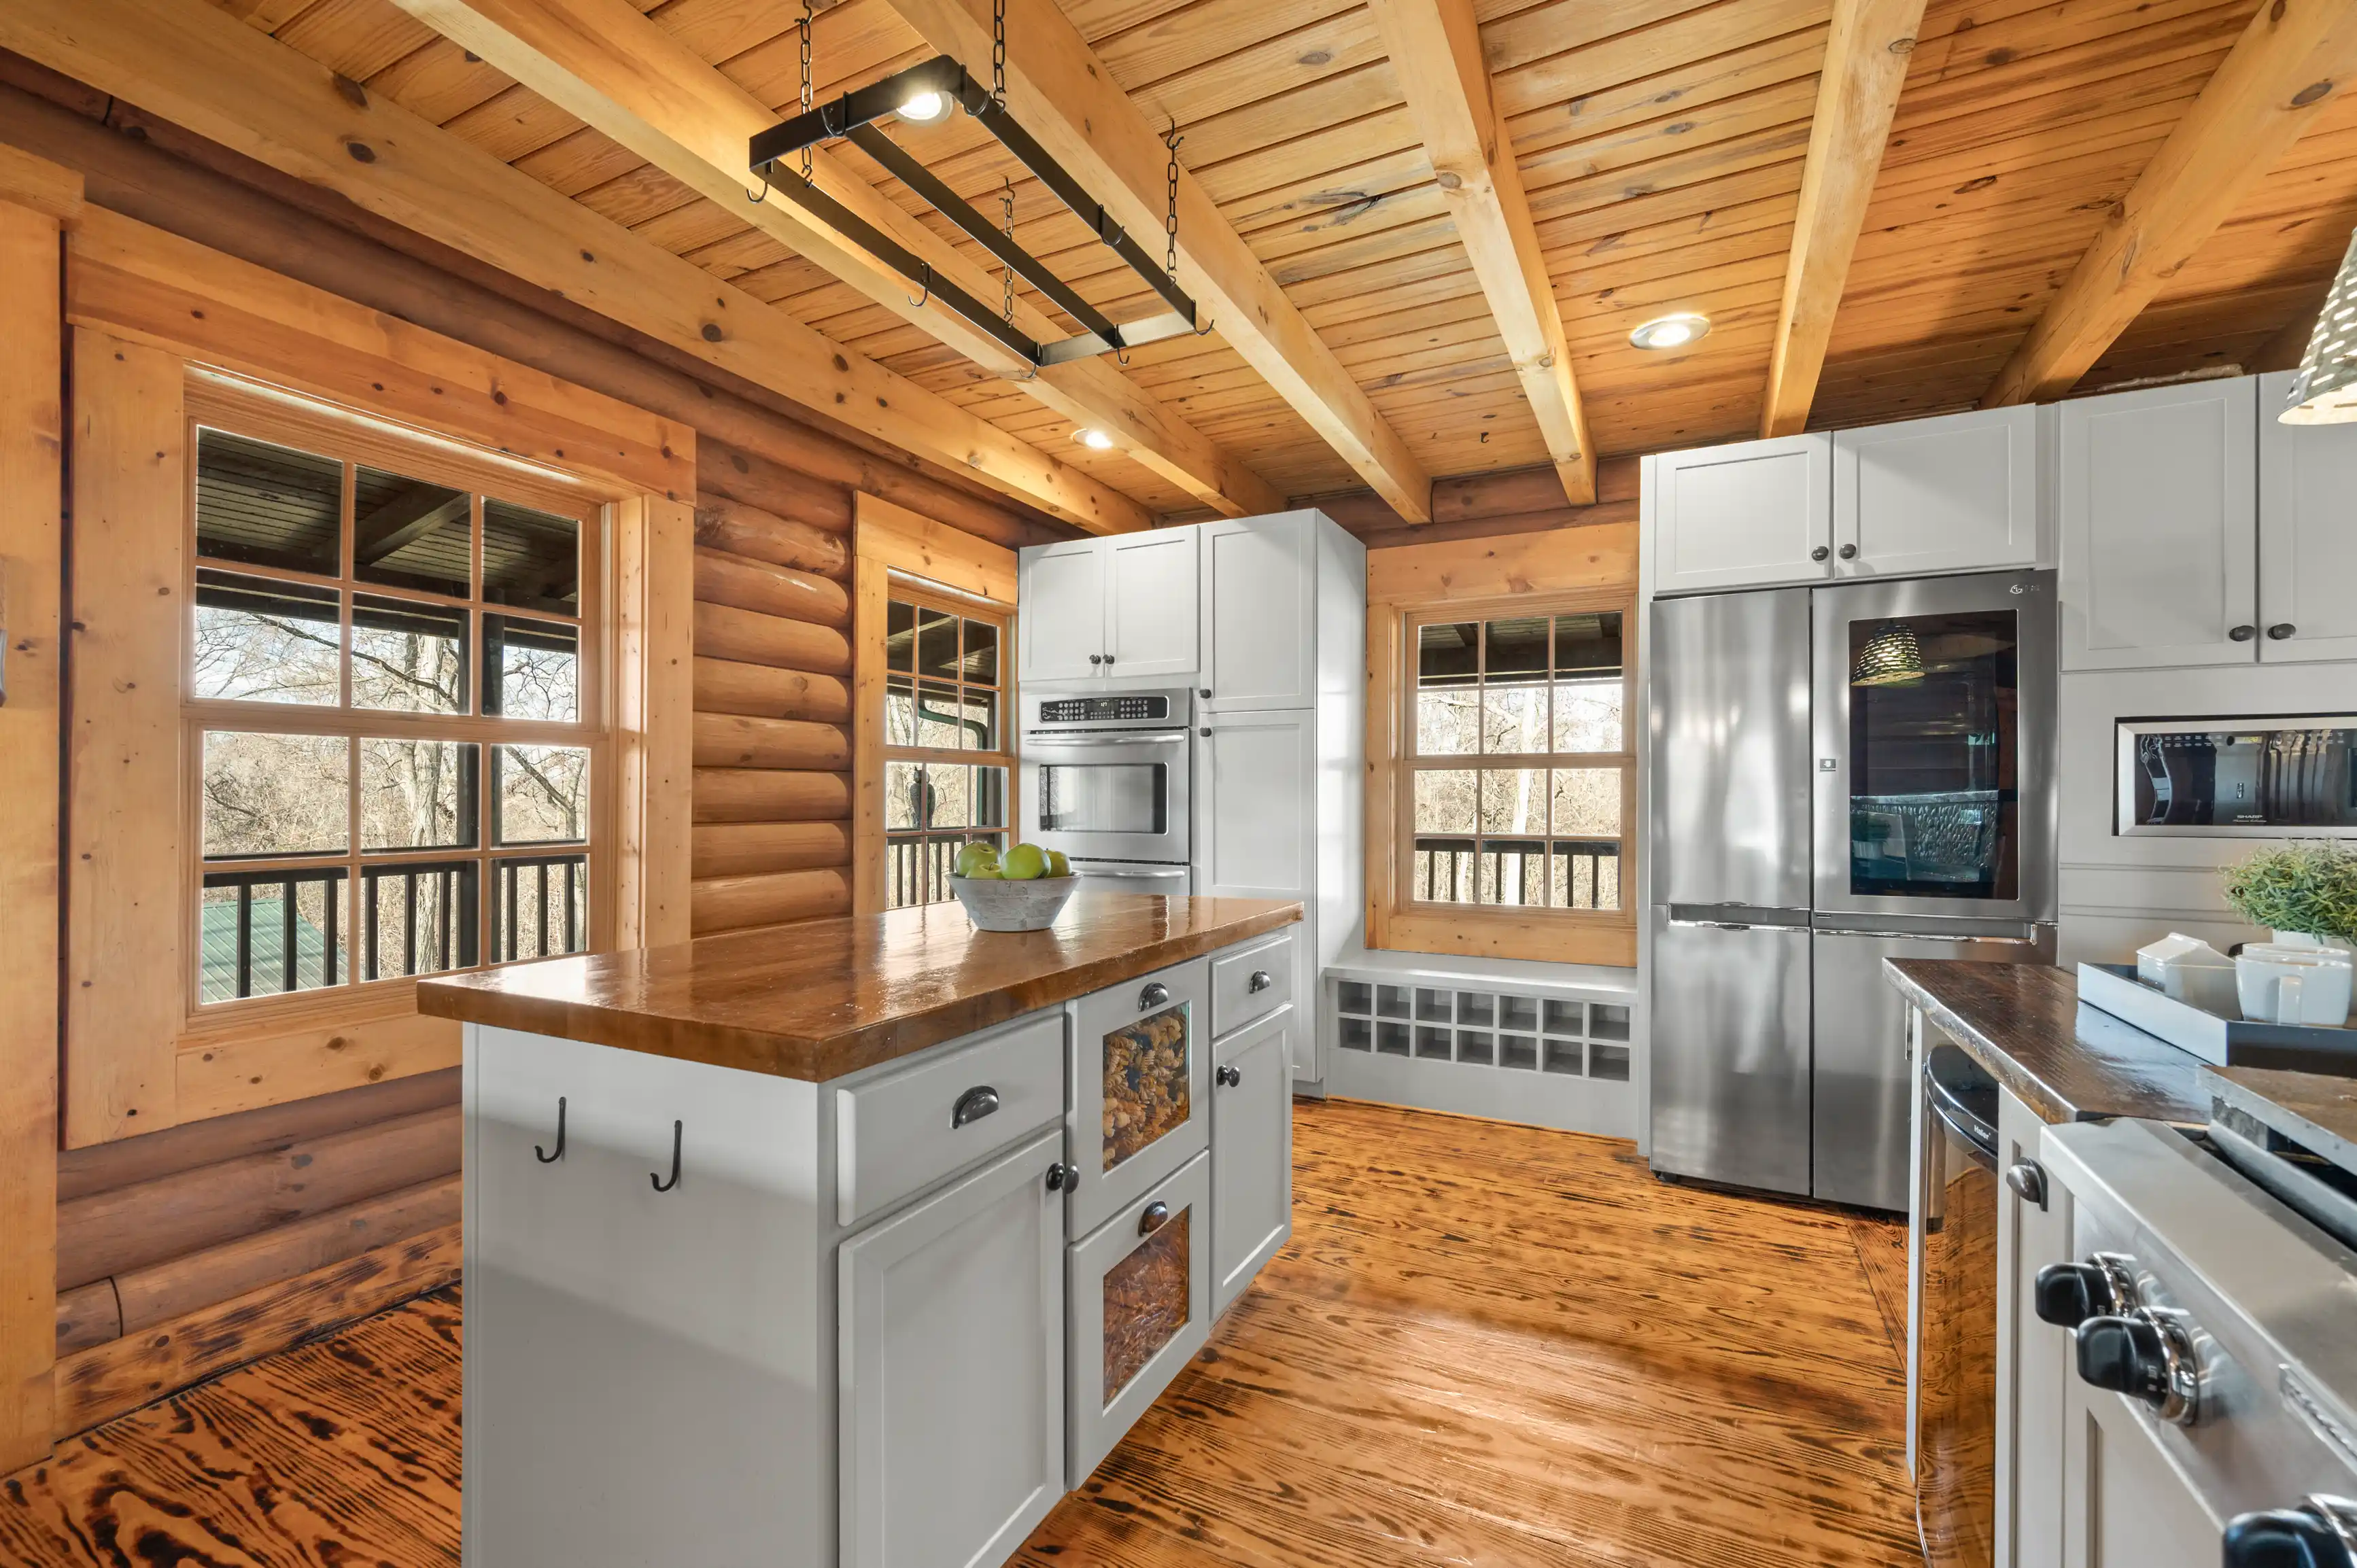 Rustic log cabin kitchen interior with modern appliances, wooden countertops, and hanging industrial light fixture.